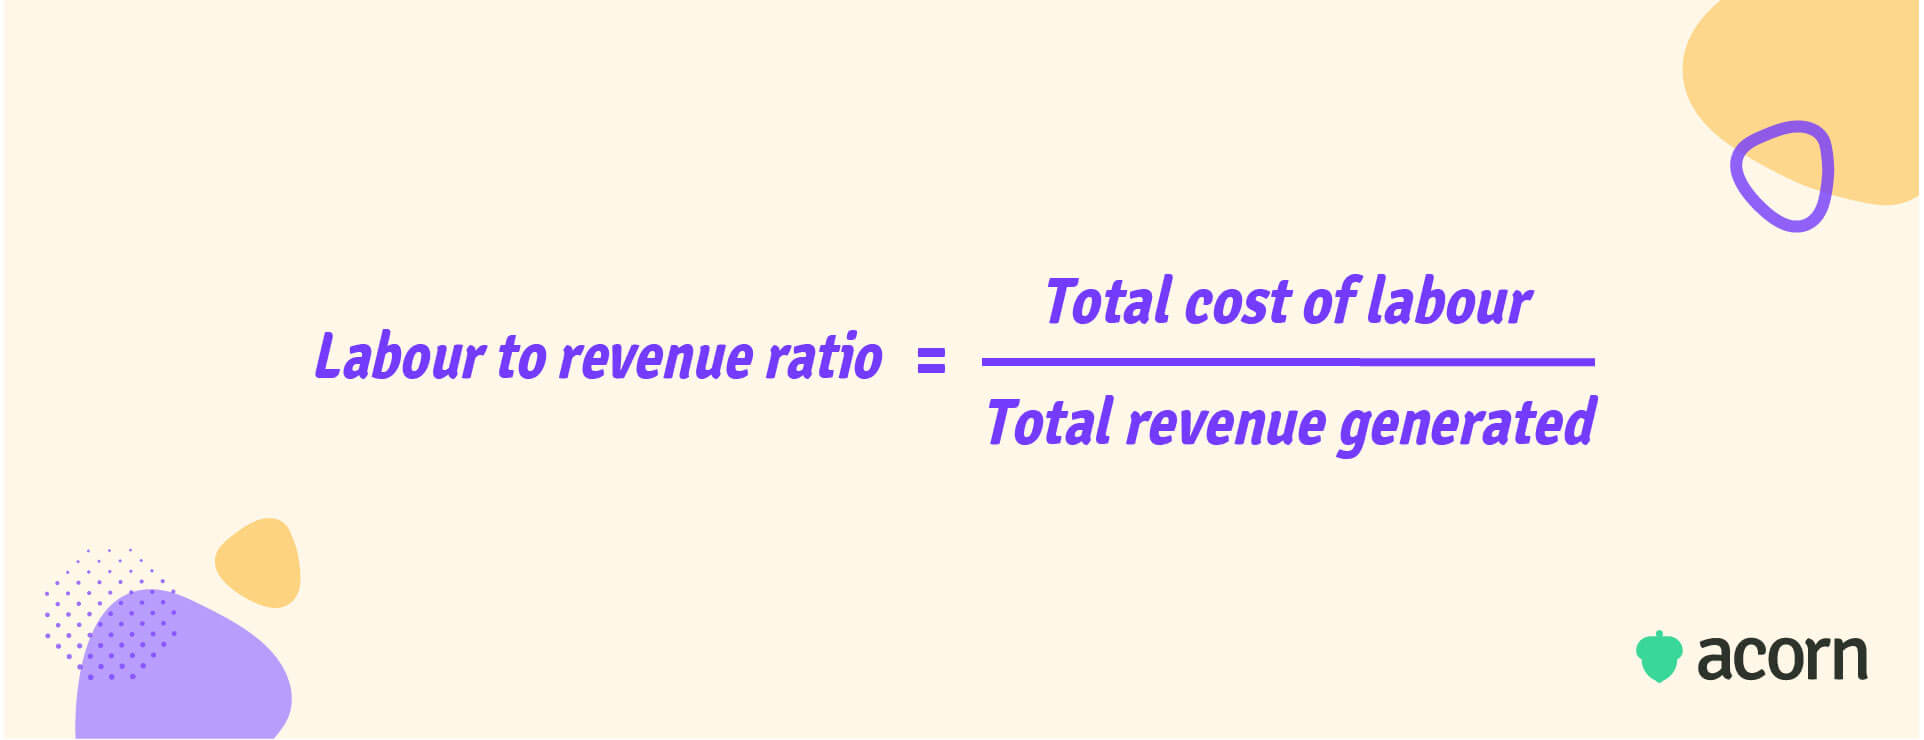 Labour to revenue ratio: Total cost of labour/Total revenue generated